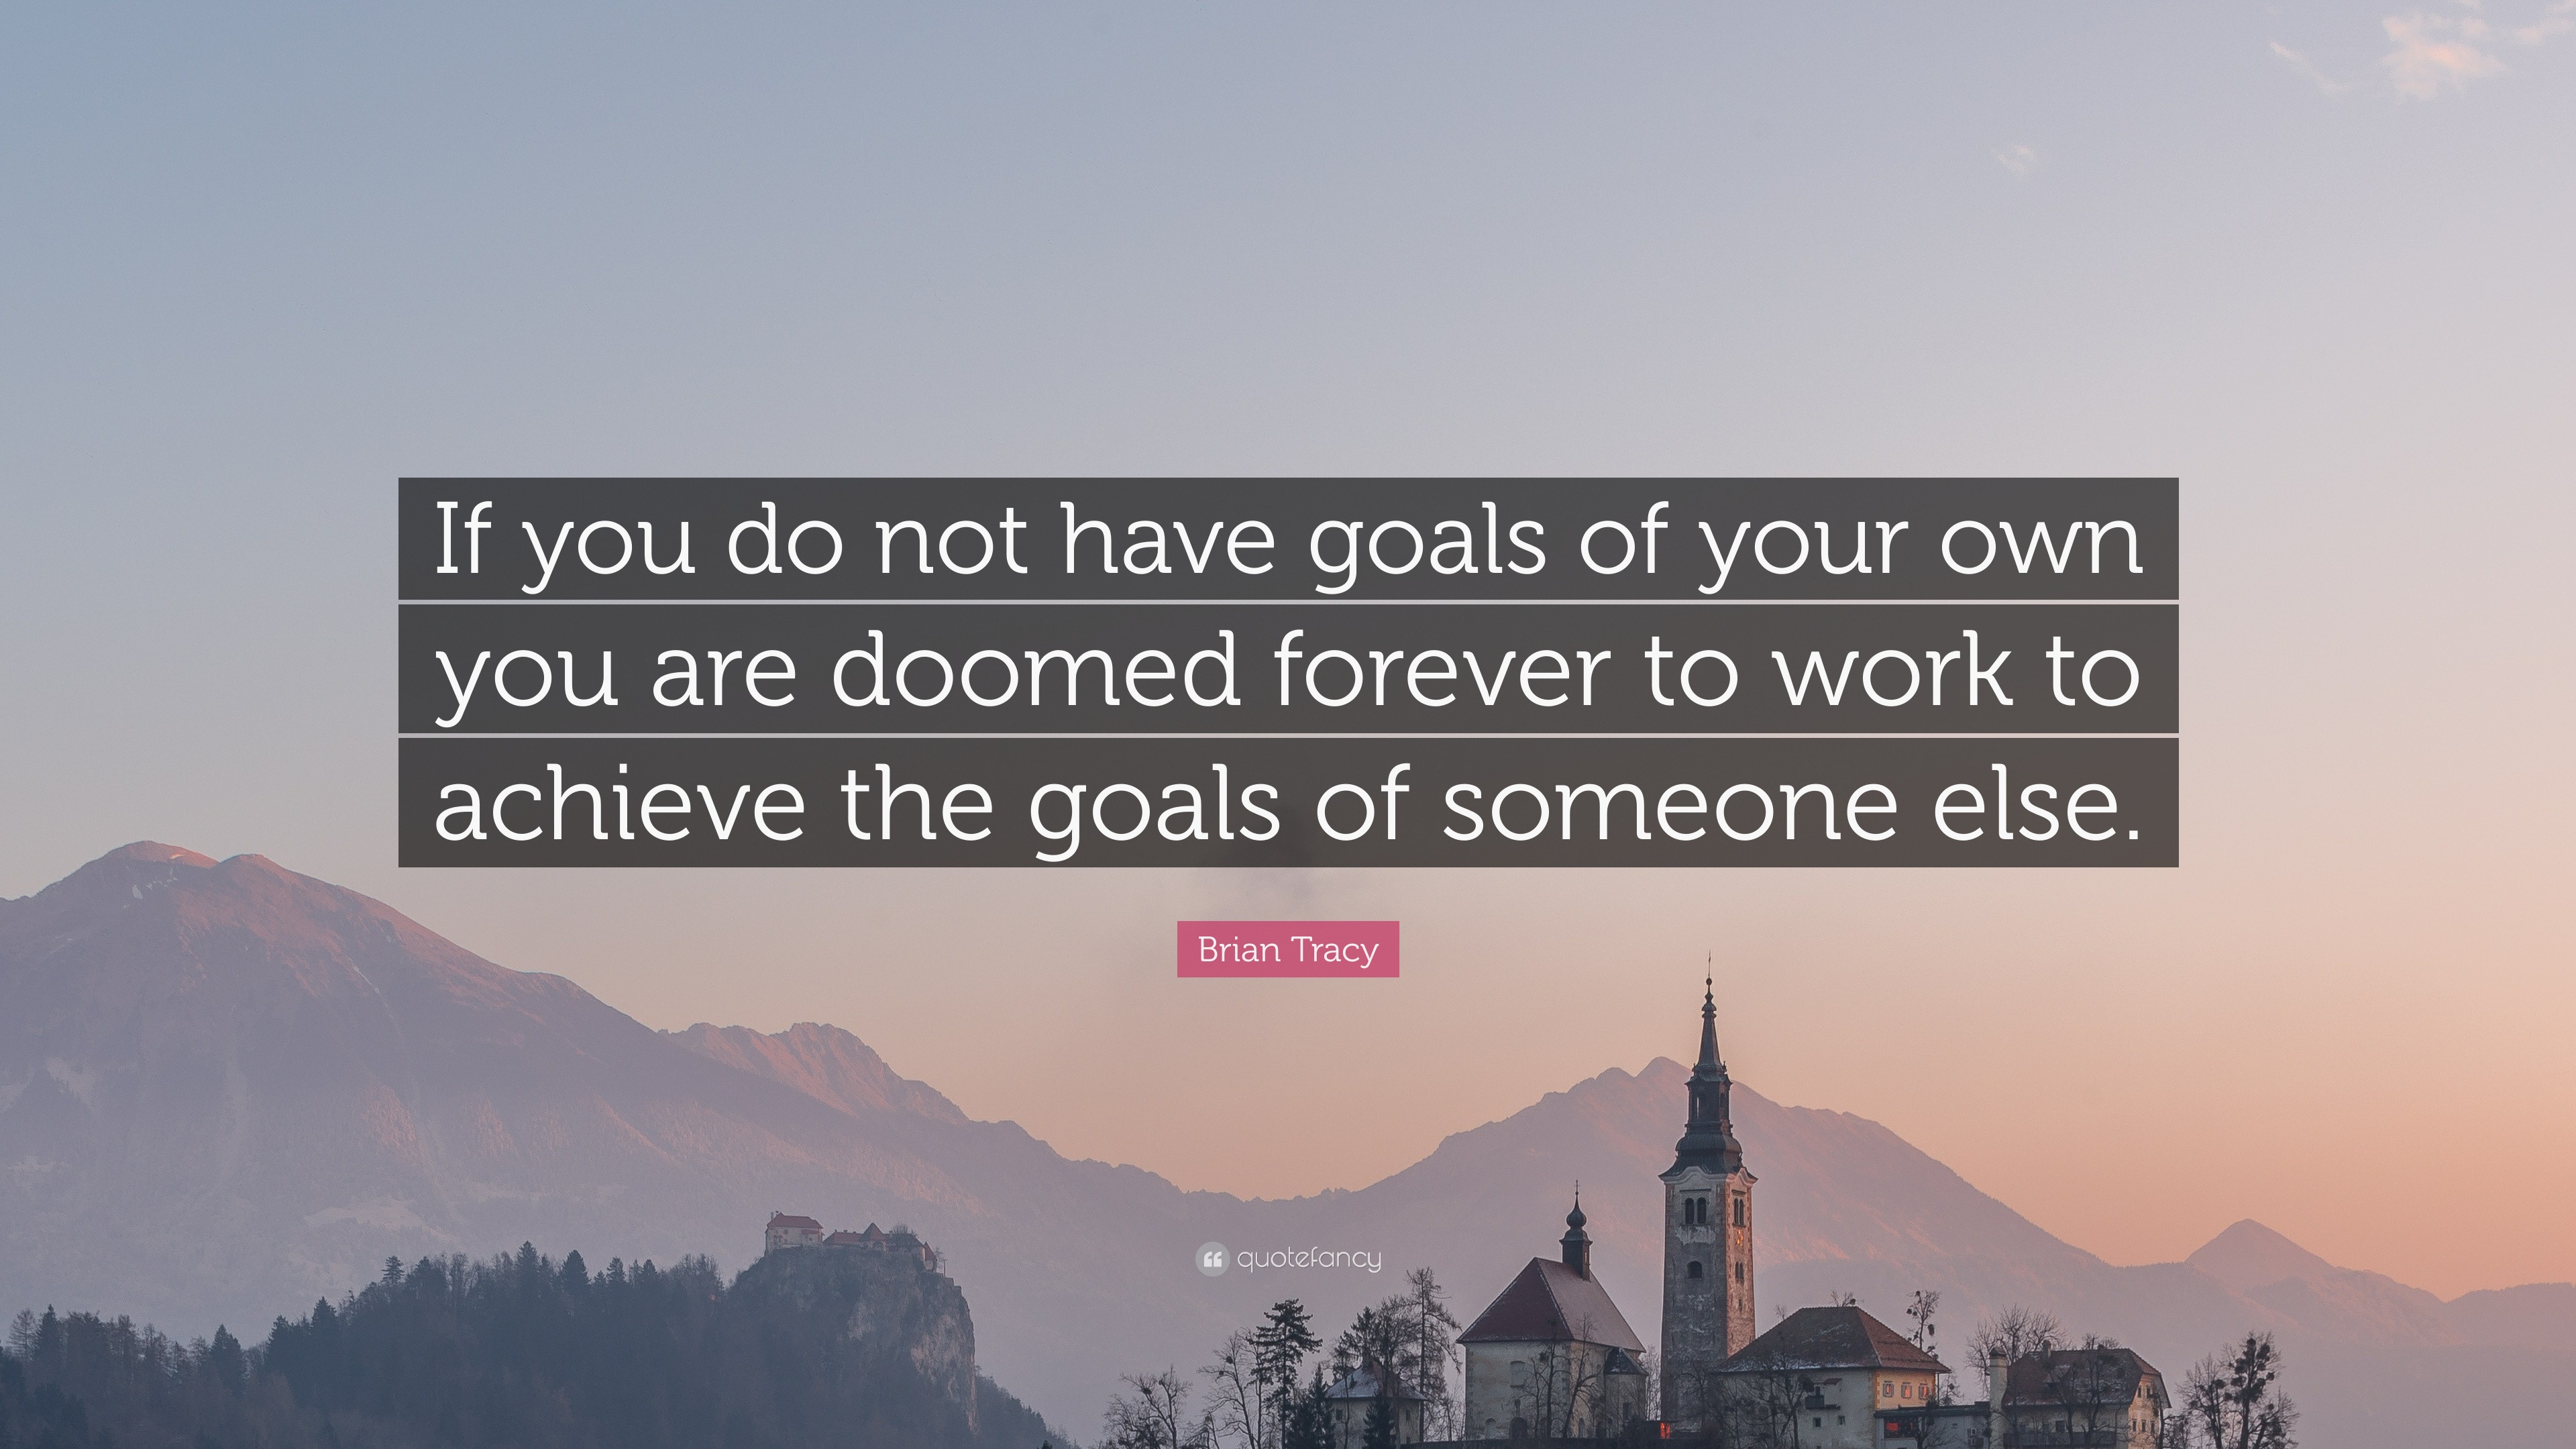 Brian Tracy Quote: "If you do not have goals of your own you are doomed forever to work to ...